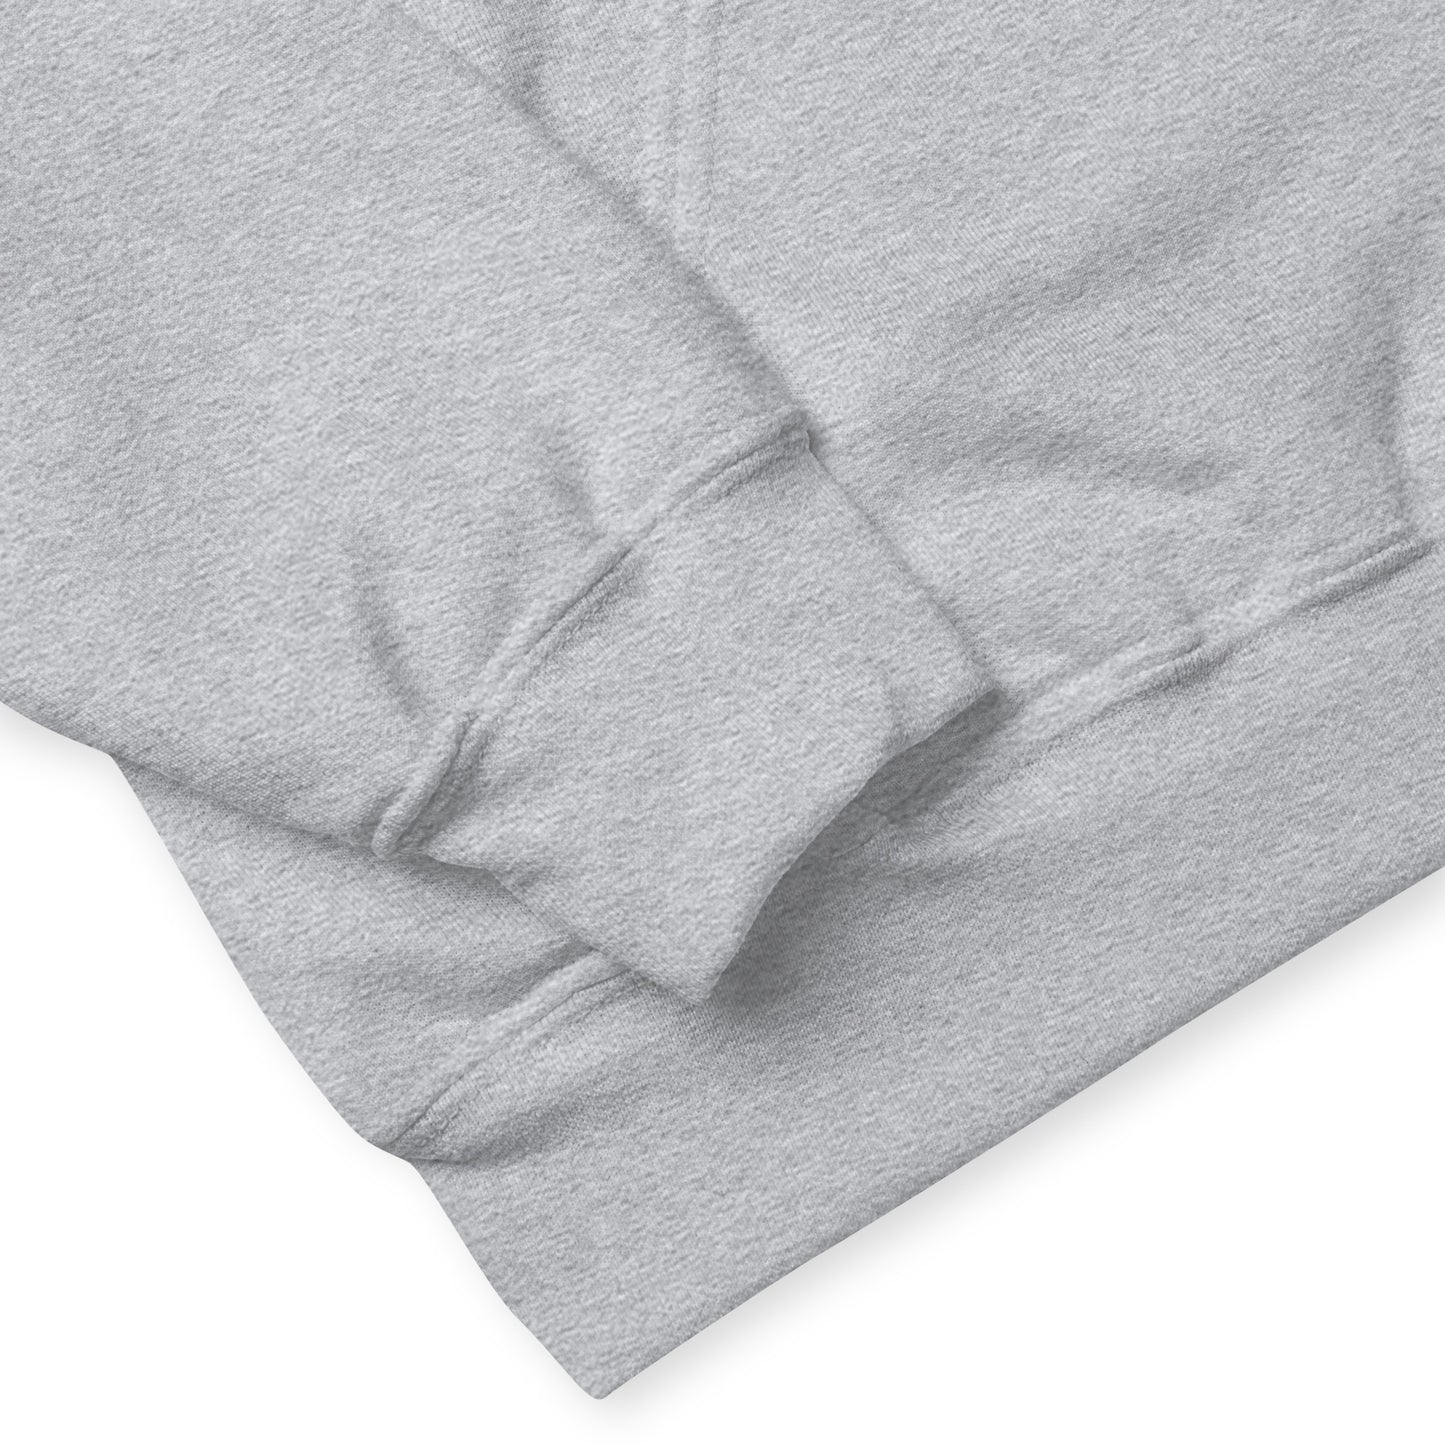 Sport grey colored unisex hoodie. Front has image of a cow skull cradling a bird nest. Features double-lined hood and front pouch pocket. Detail view of waist and wrist cuffs.